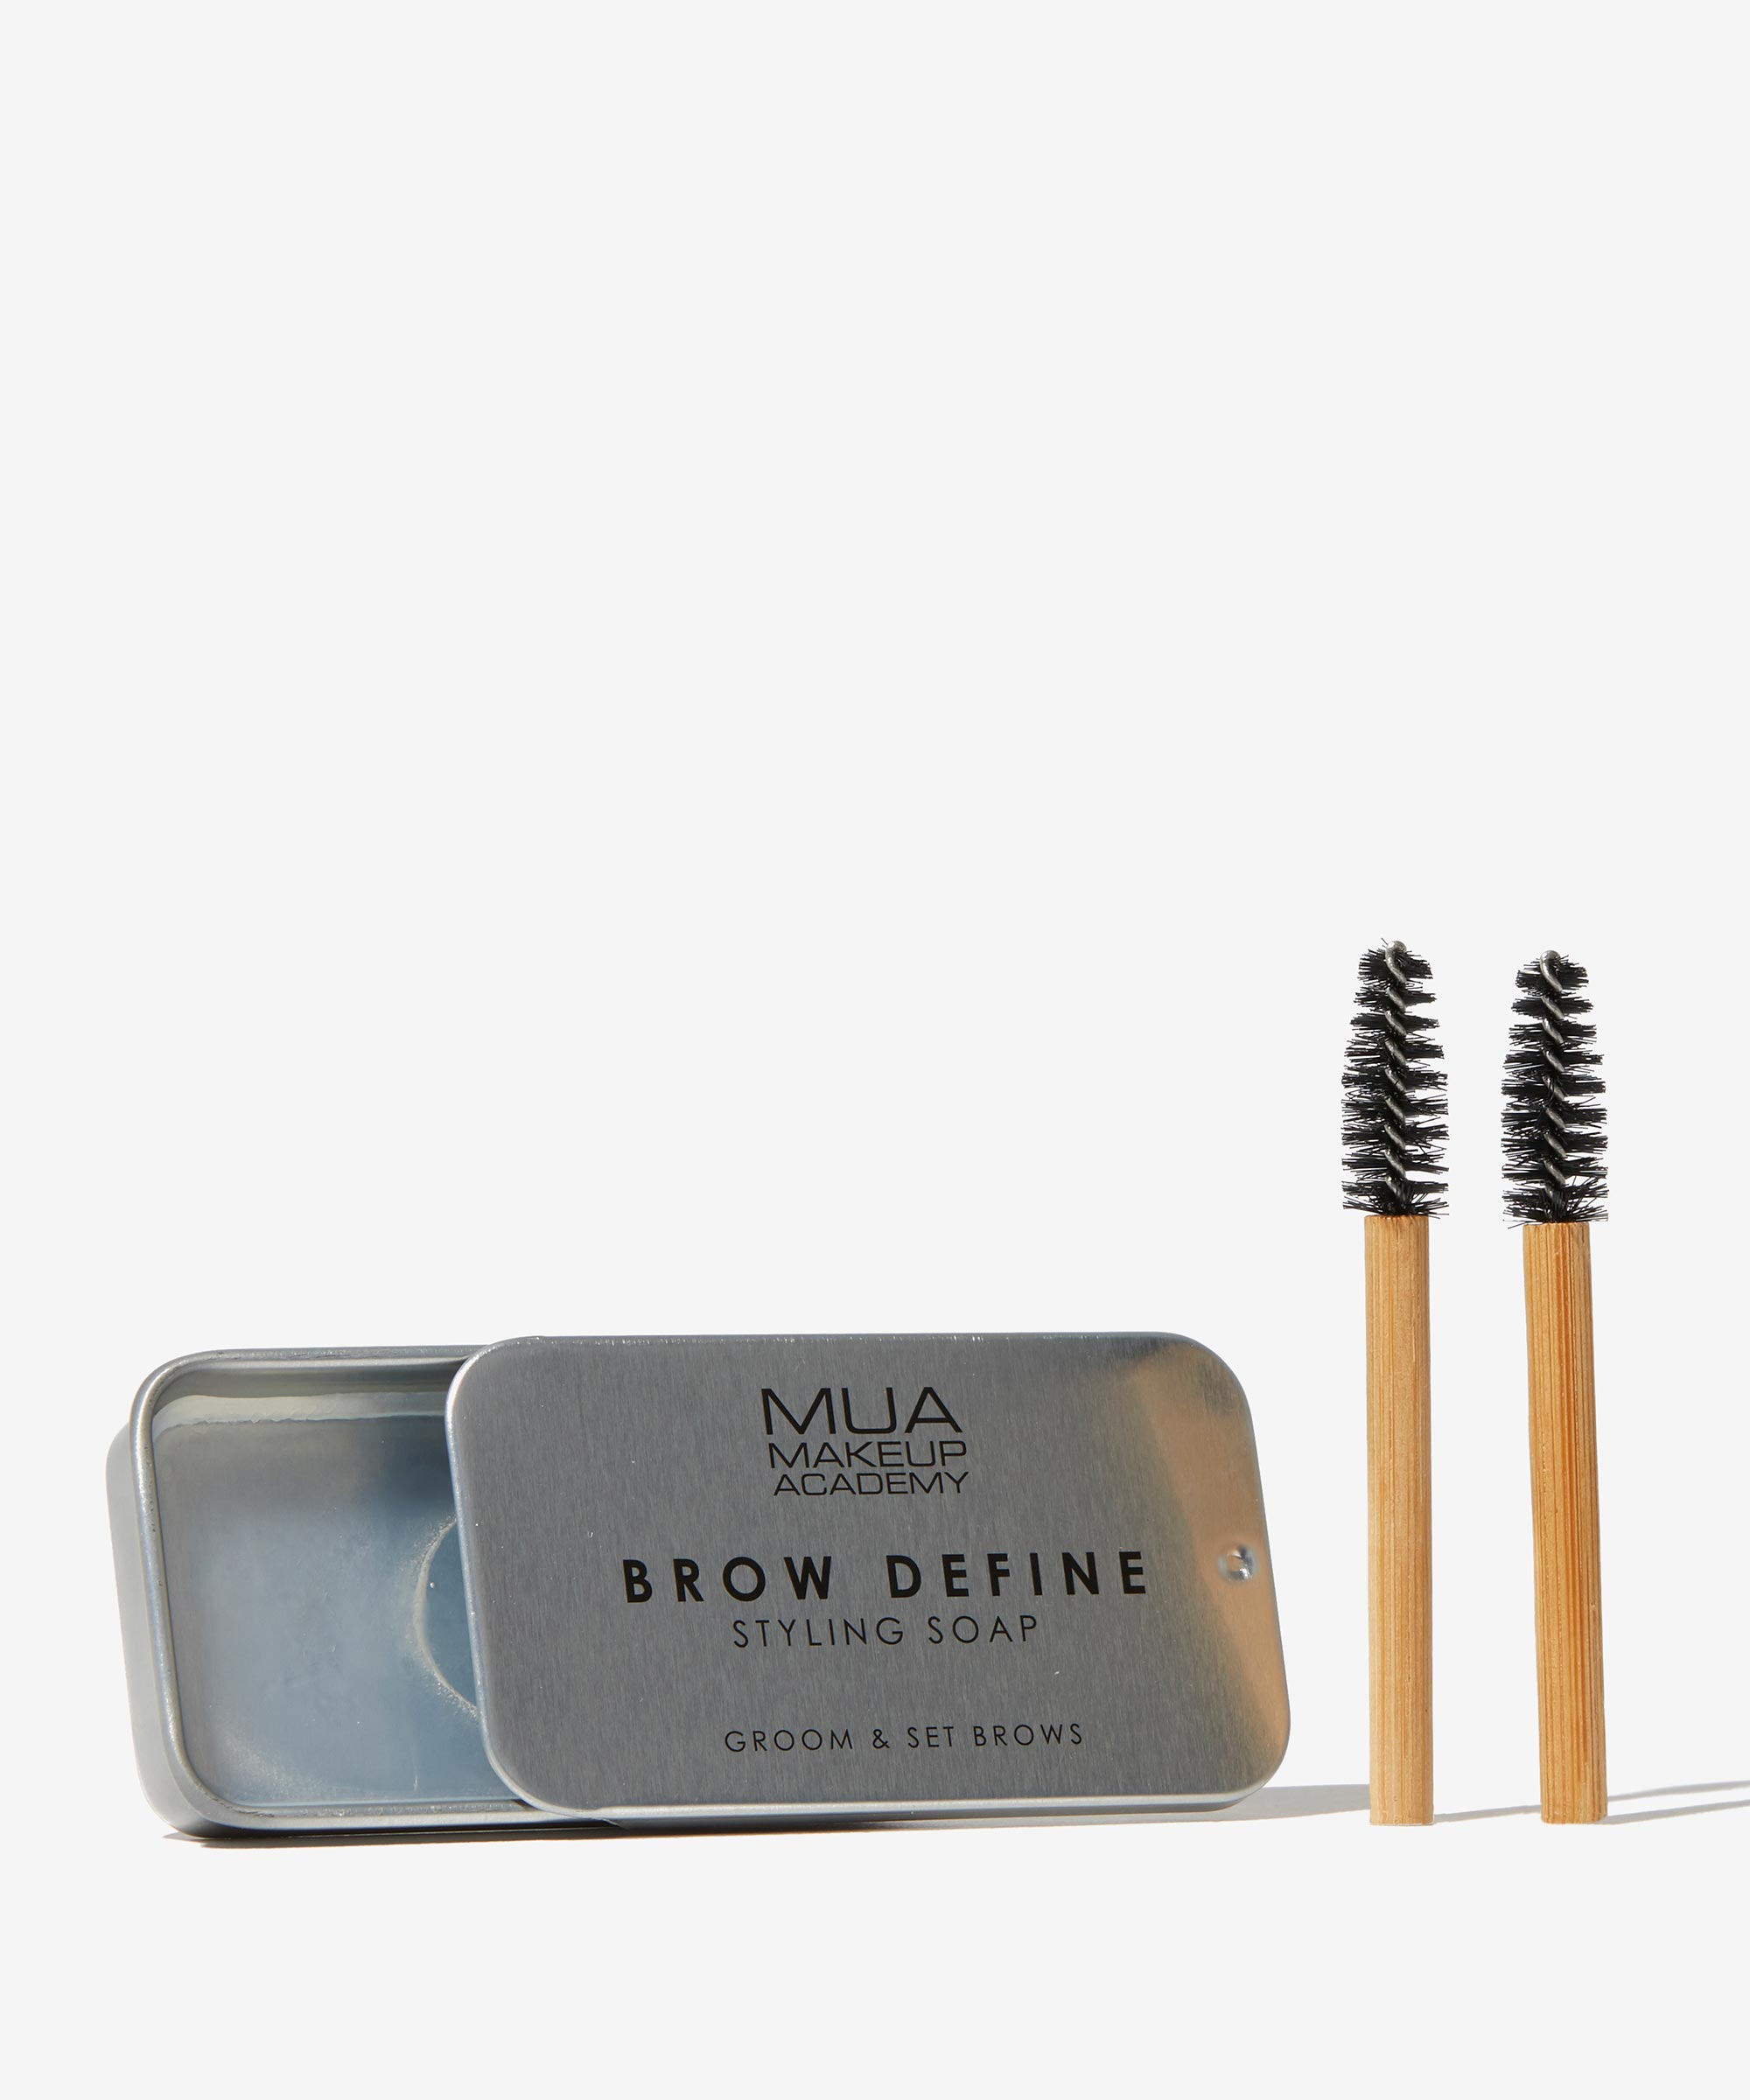 MUA Makeup Academy Brow Define Styling Soap at BEAUTY BAY